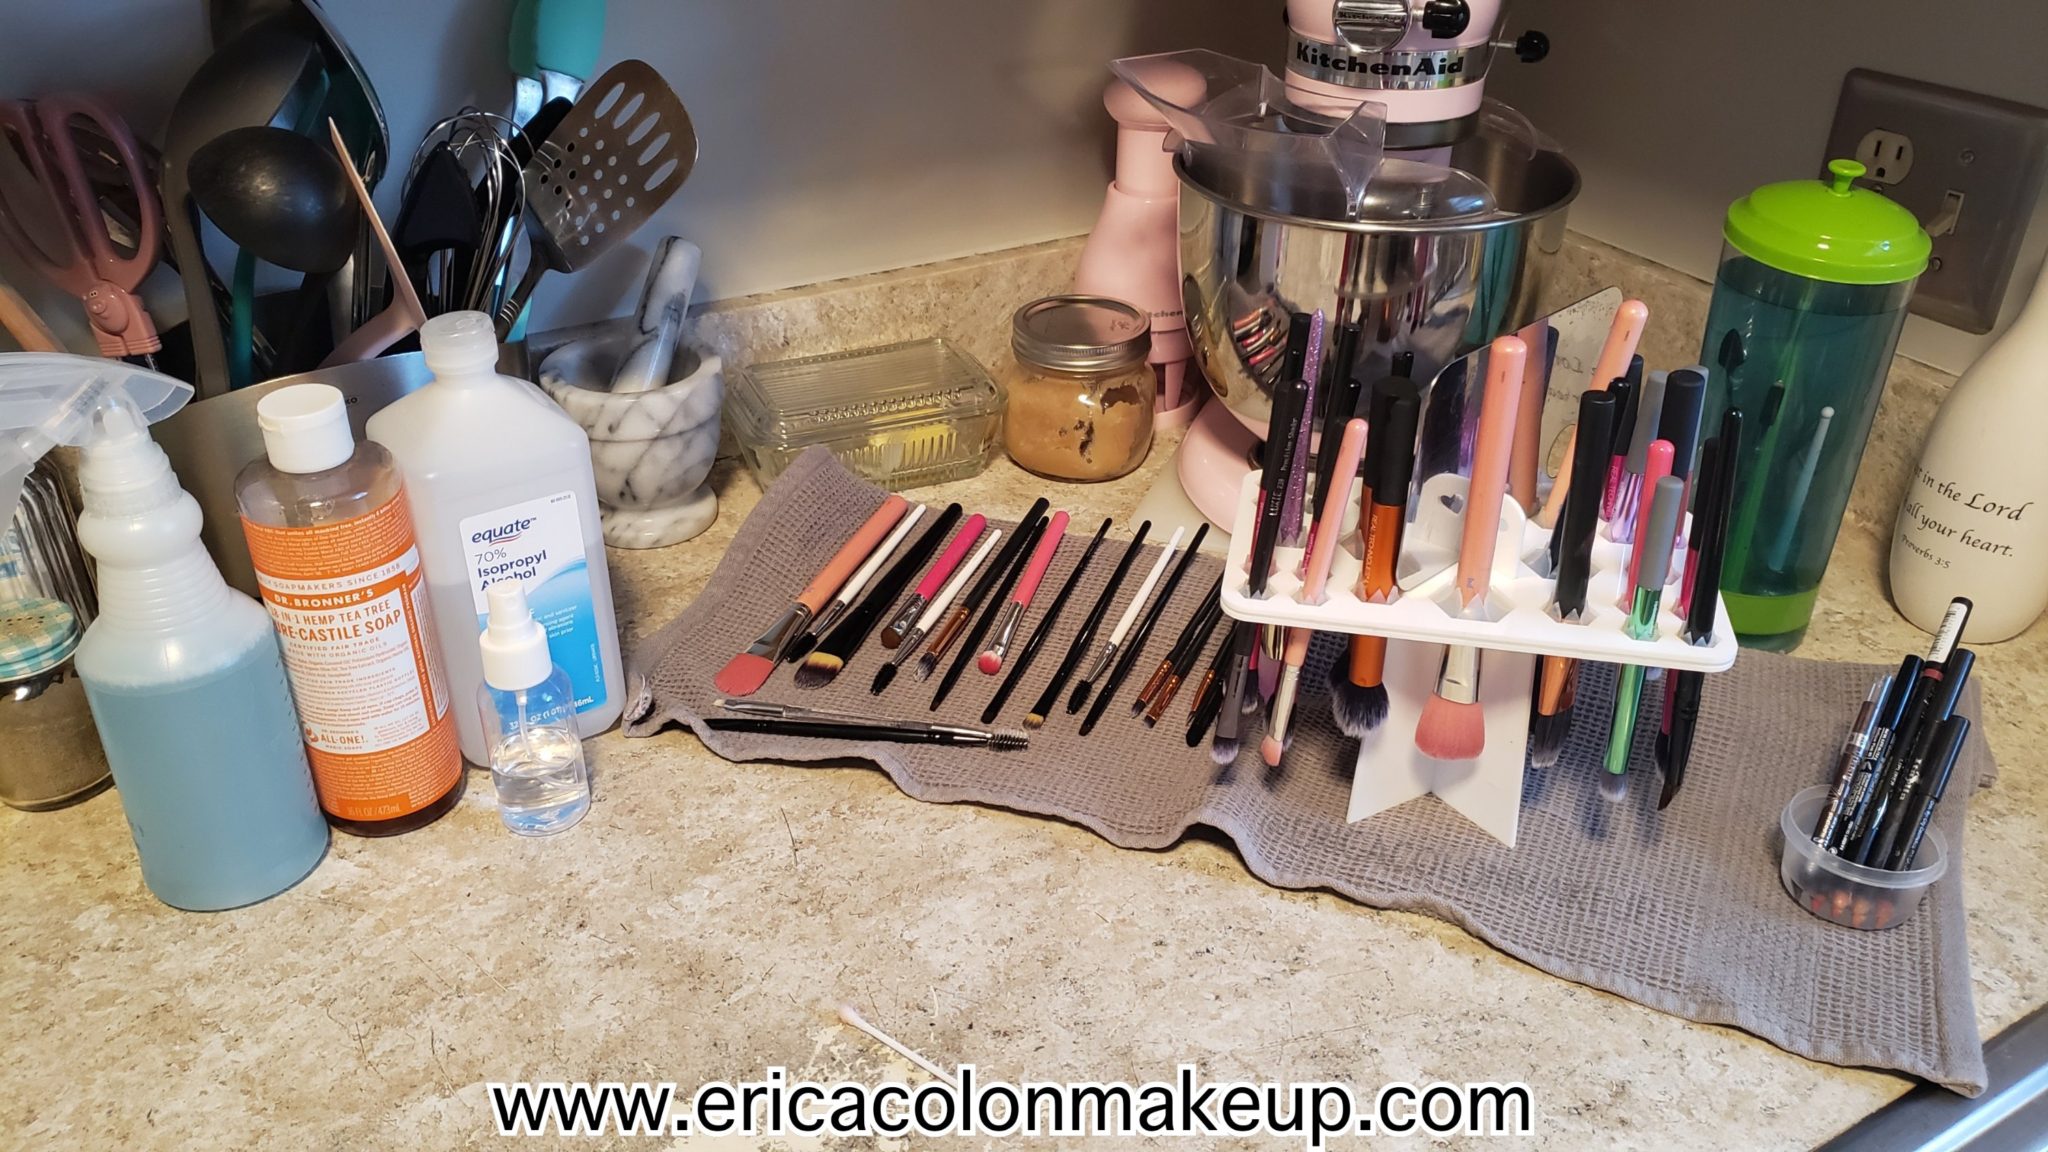 Erica Colon Makeup Artist Sanitization Disinfection Kit Cleaning